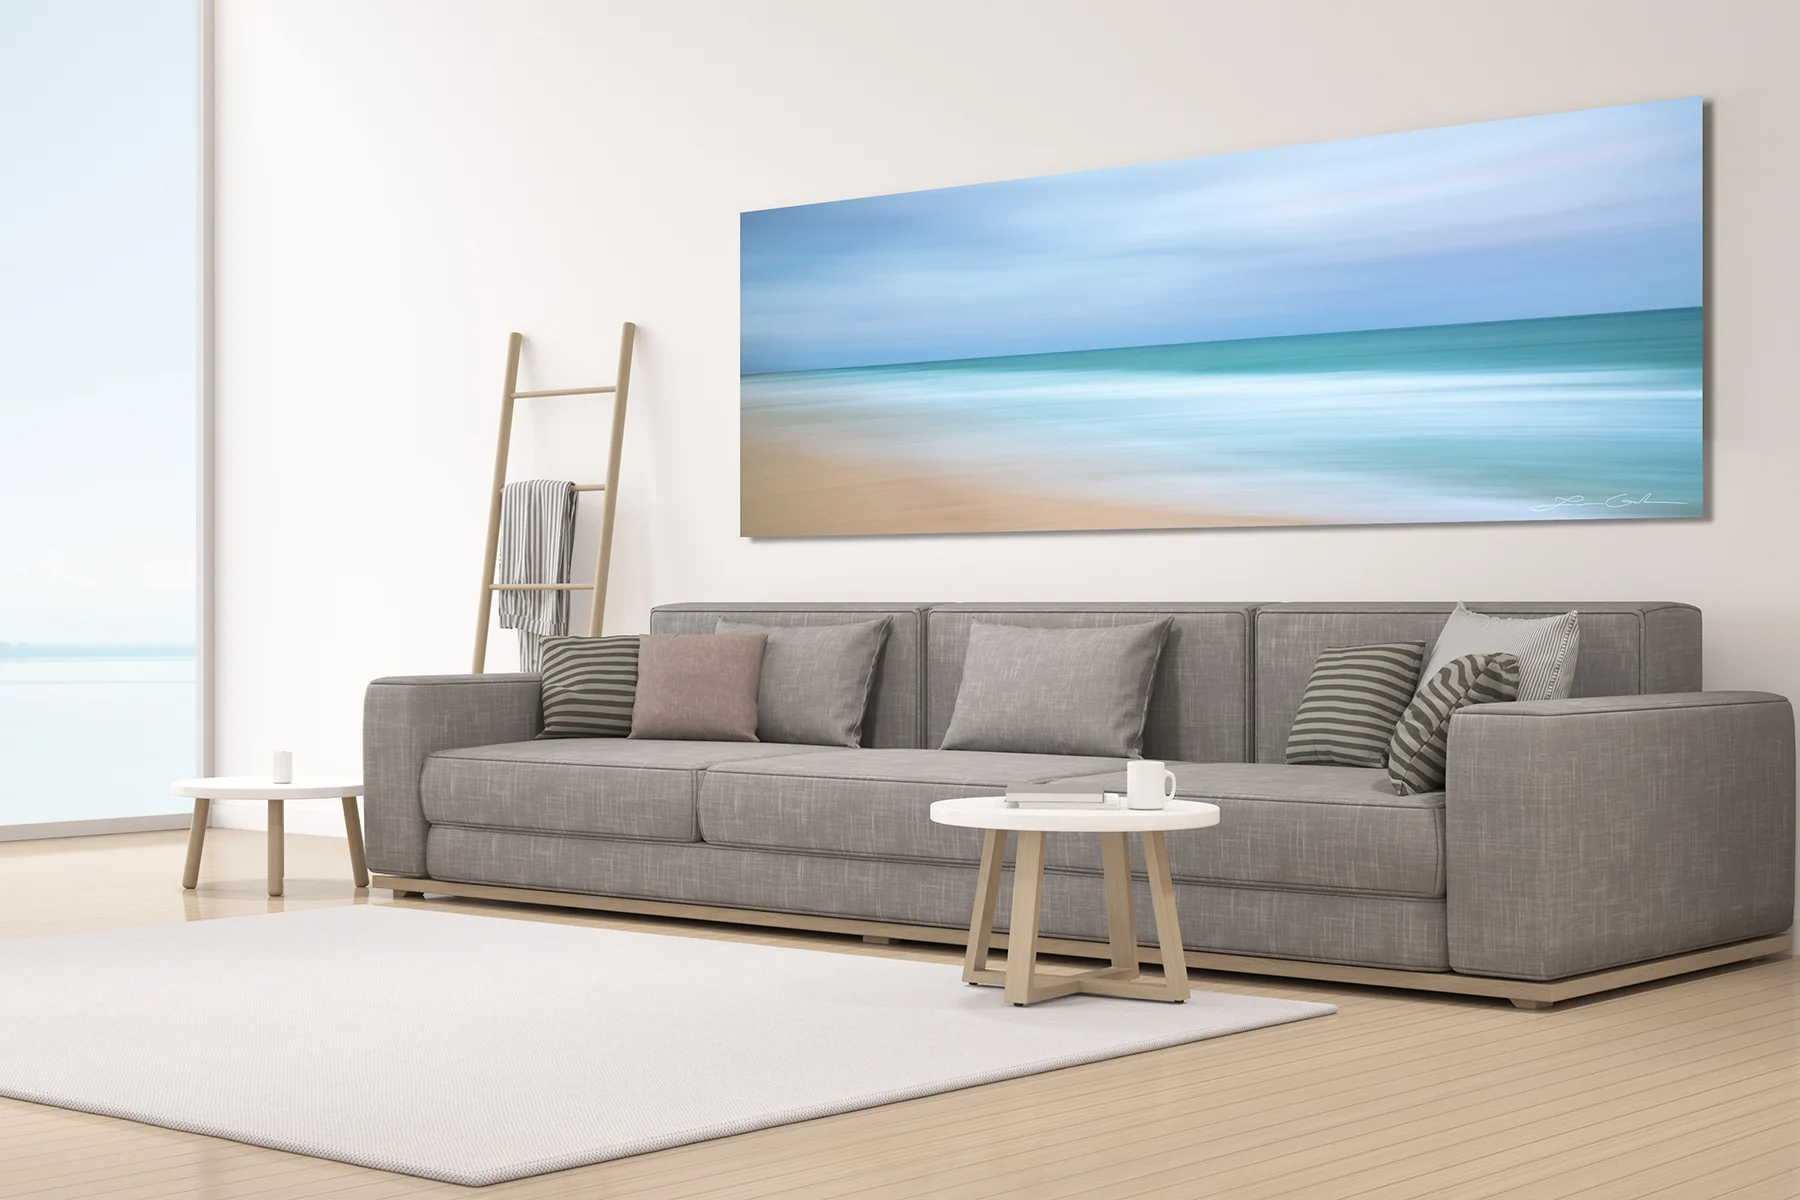 Panoramic ocean abstract beach wall art in a living room - Gintchin Fine Art